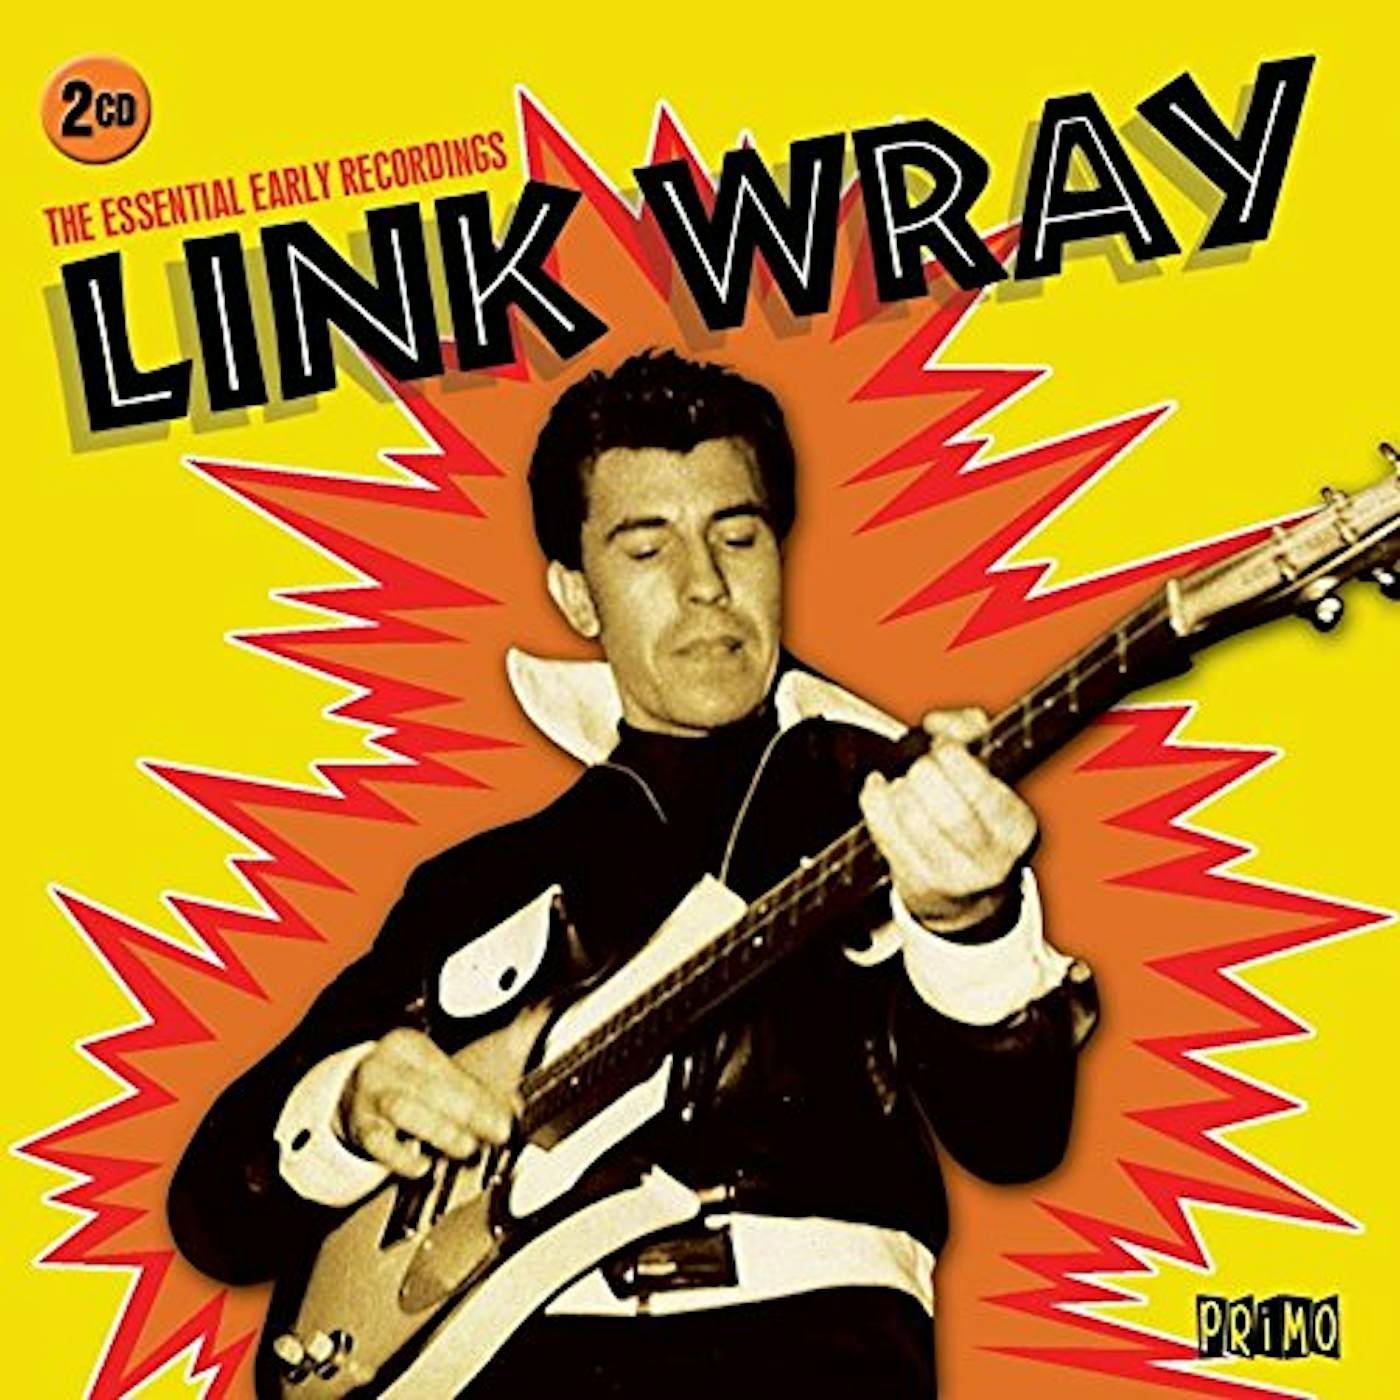 Link Wray ESSENTIAL RECORDINGS CD